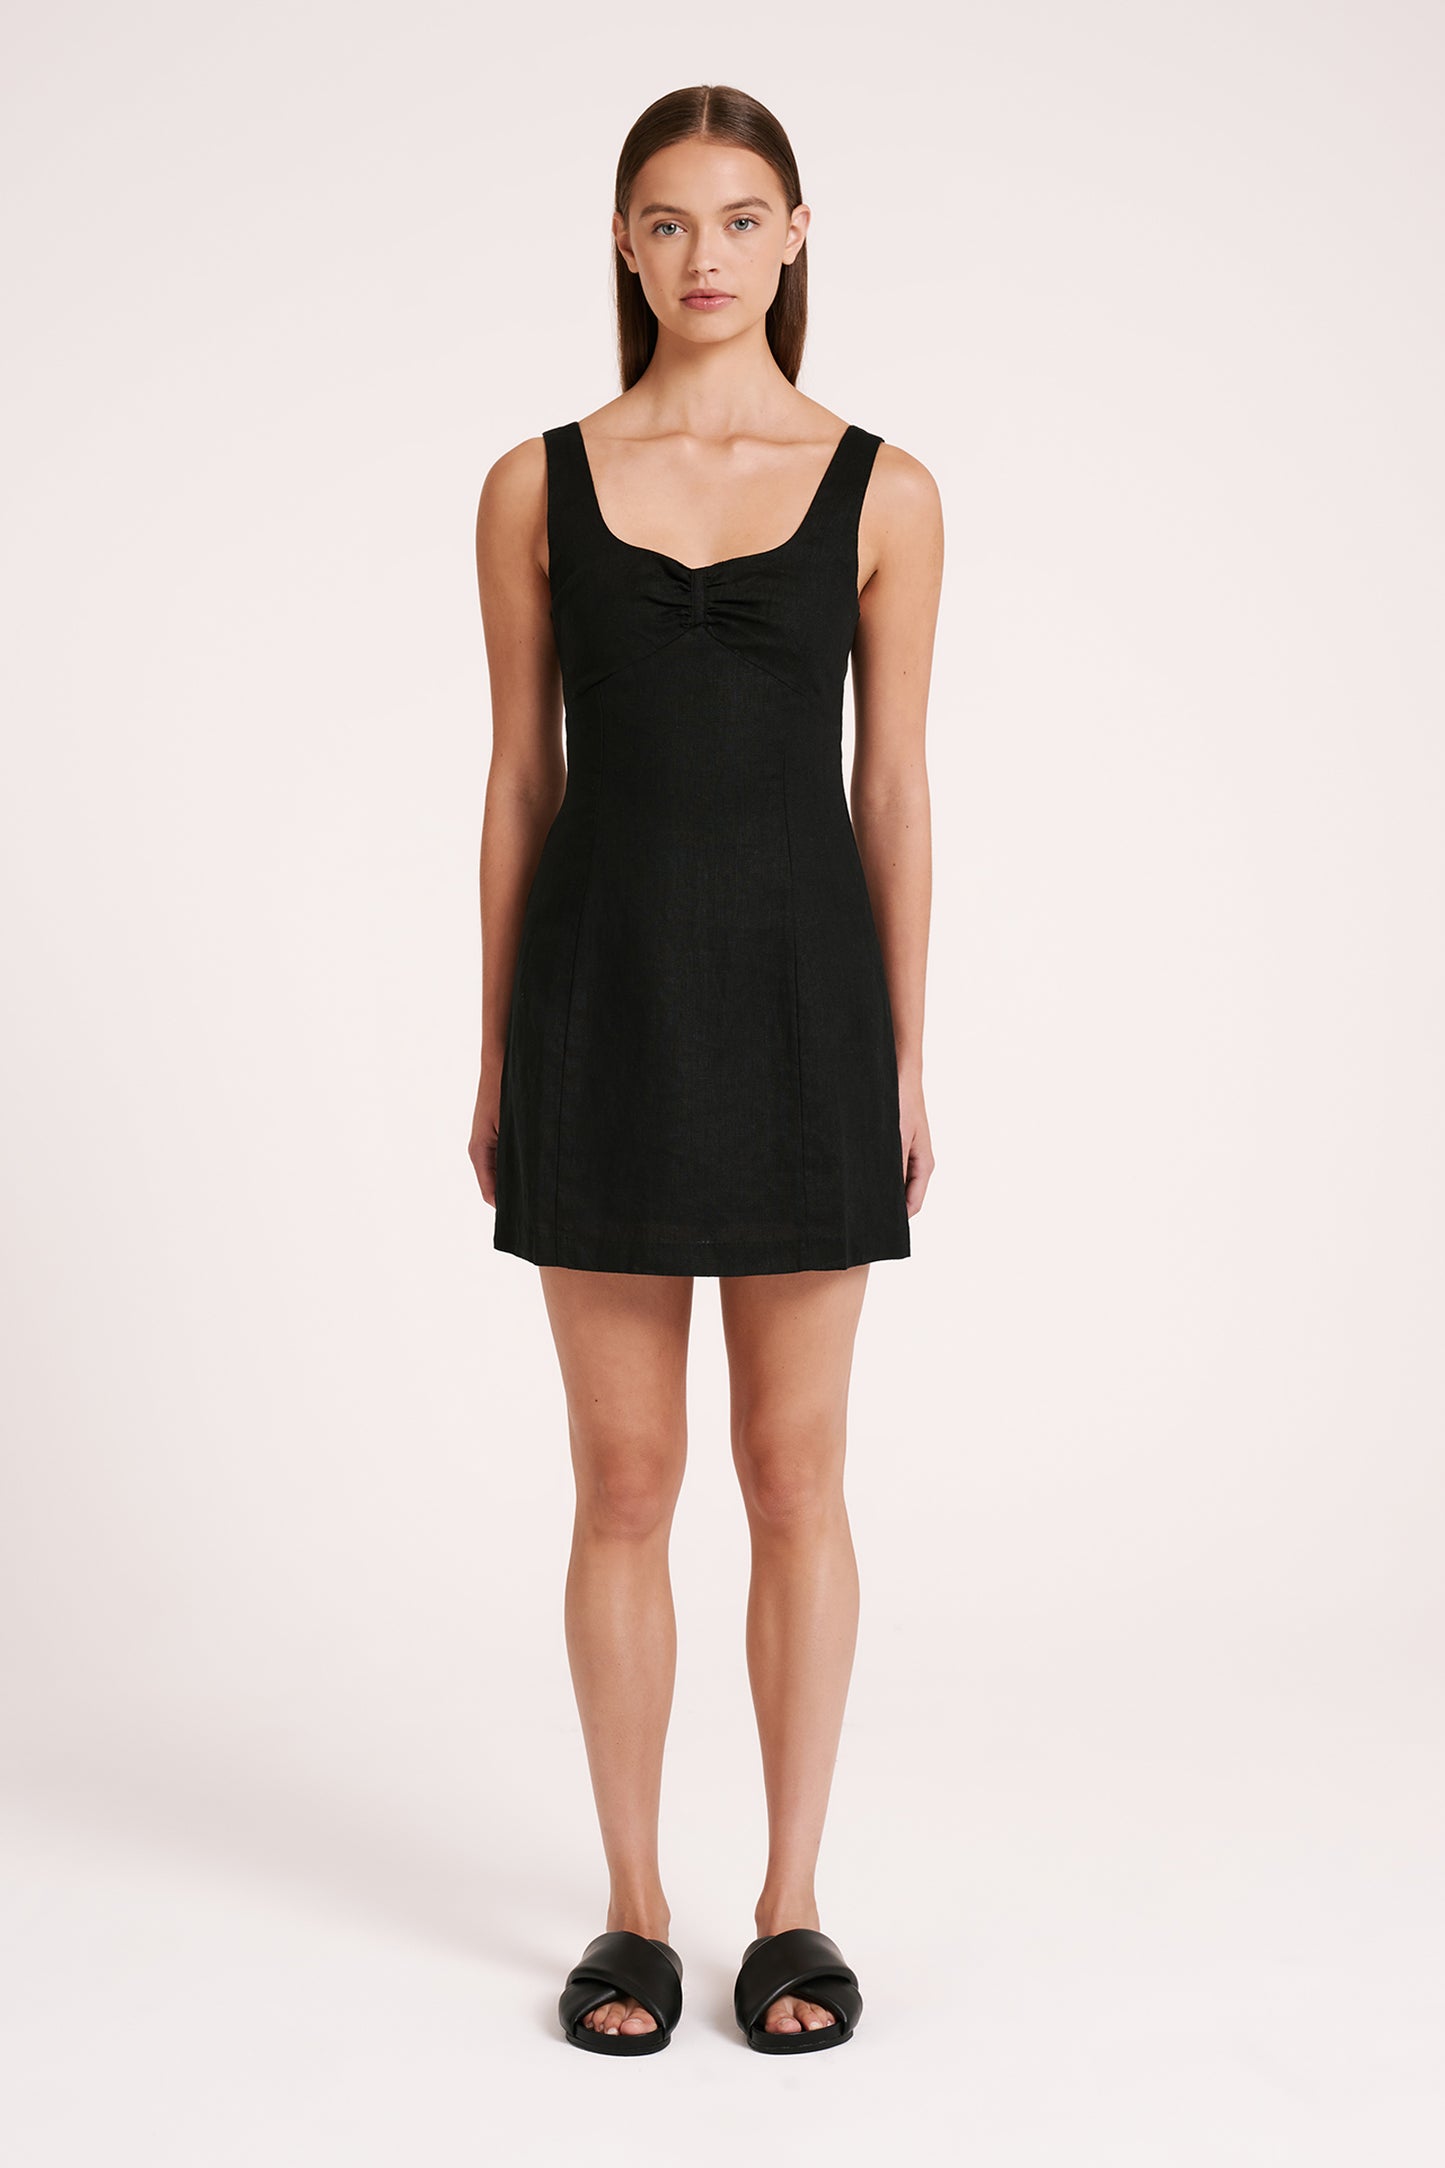 The Sibyl Linen Dress in black is made from 100% linen which has been washed for a soft, breathable hand feel. The silhouette fits close to the body with an A-line mini skirt. Features include a soft square neckline, panelled under bust seam with ruching and thick straps with adjusters. Dress is fully lined with a centre back zipper.